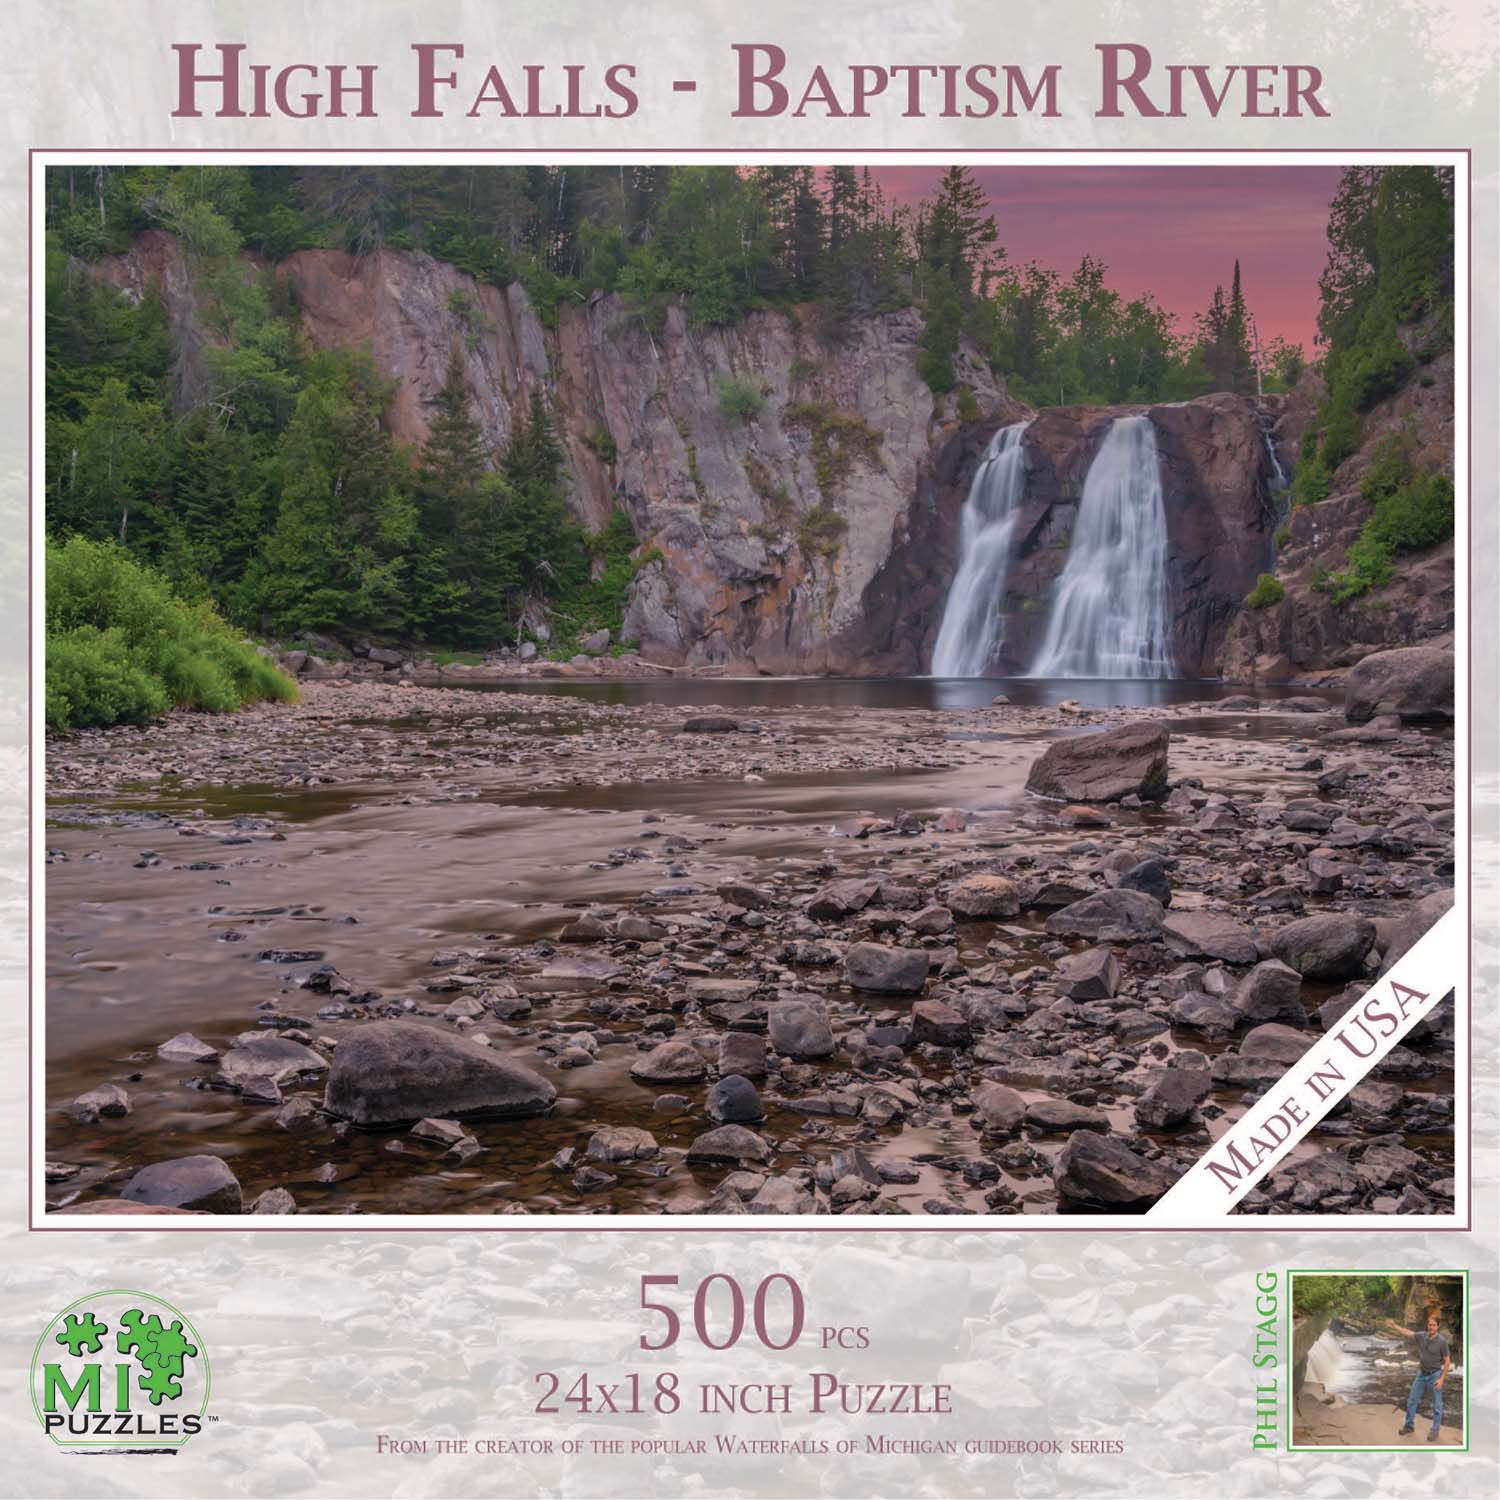 High Falls - Baptism River Photography Jigsaw Puzzle